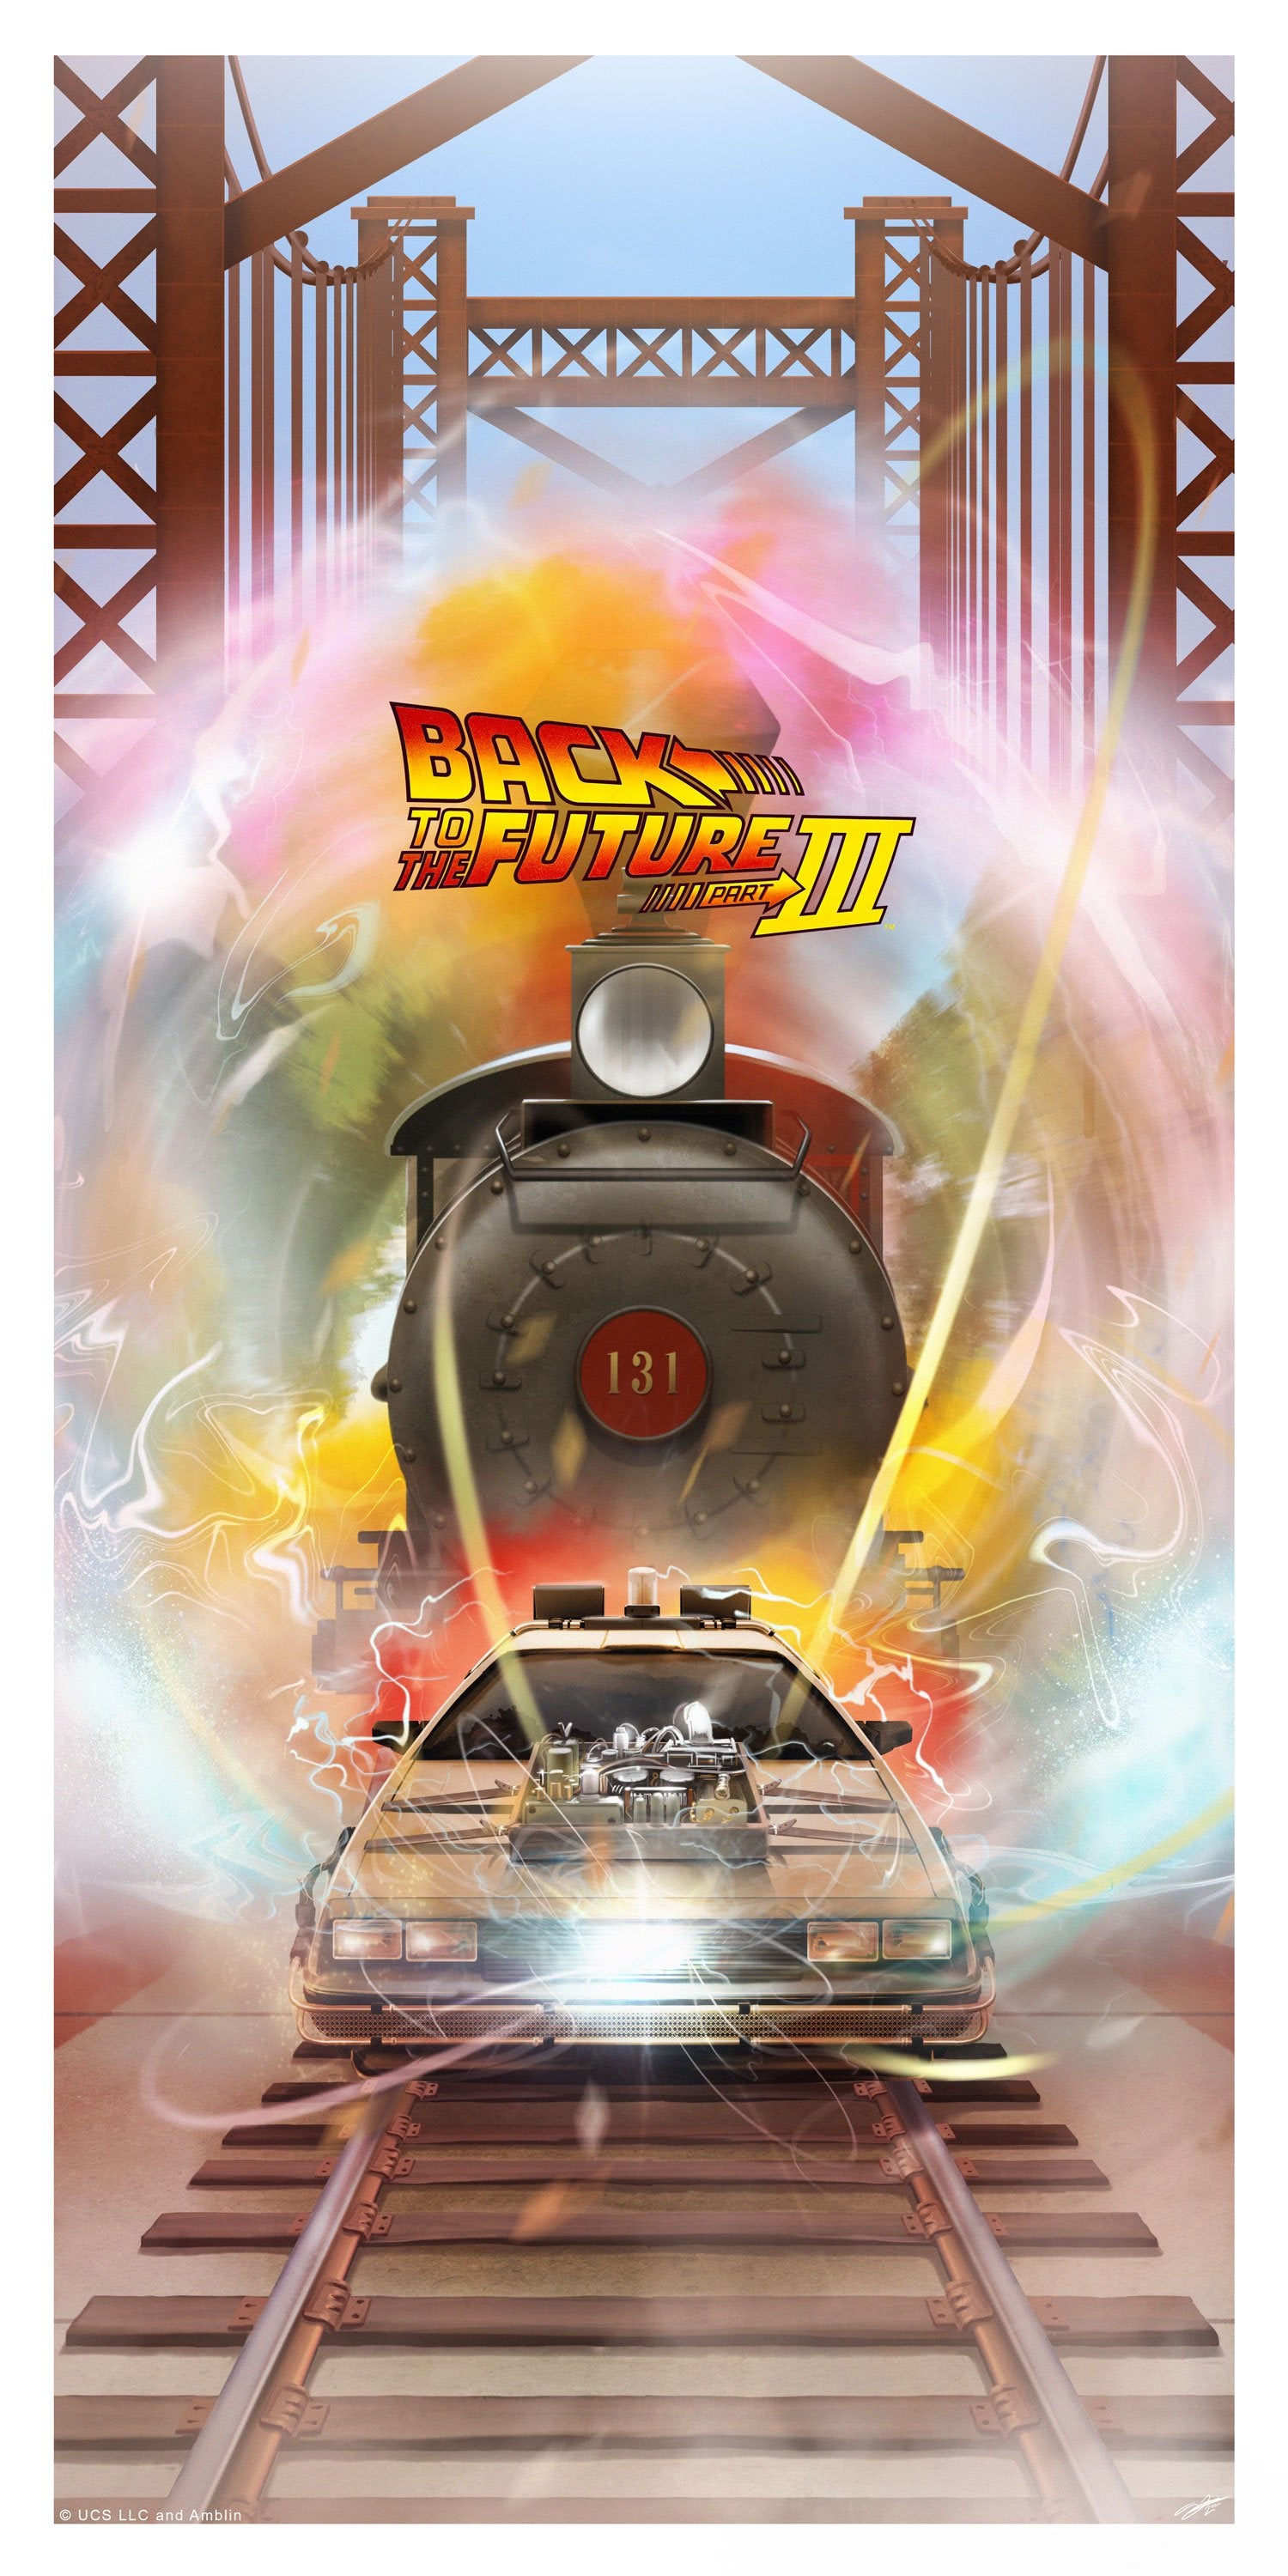 back to the future part iii poster art